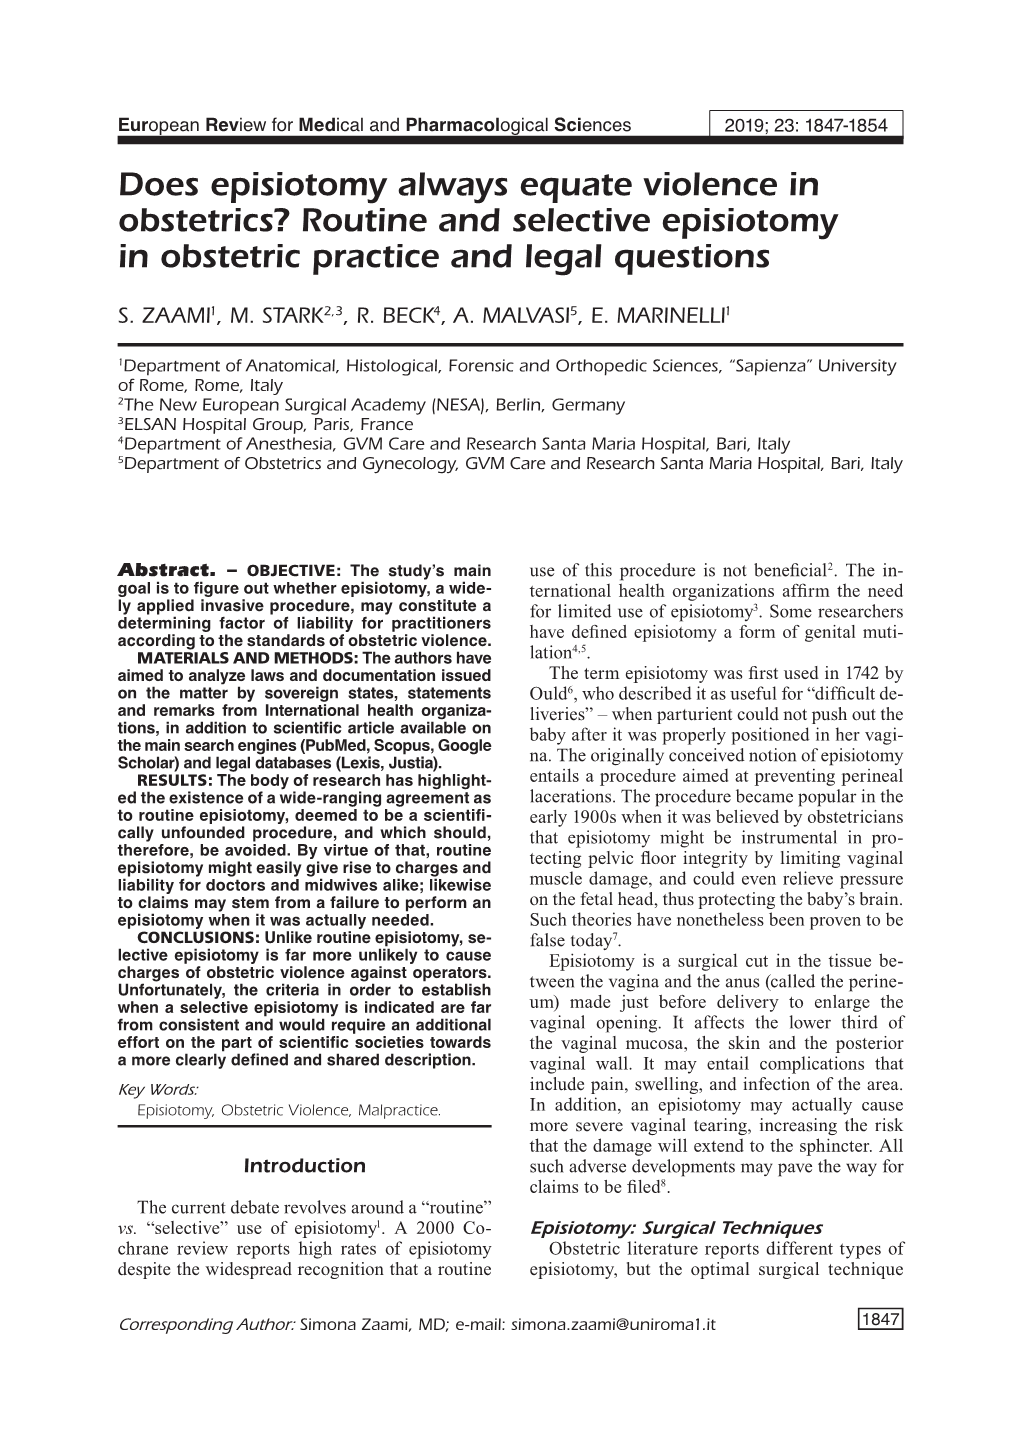 Does Episiotomy Always Equate Violence in Obstetrics? Routine and Selective Episiotomy in Obstetric Practice and Legal Questions